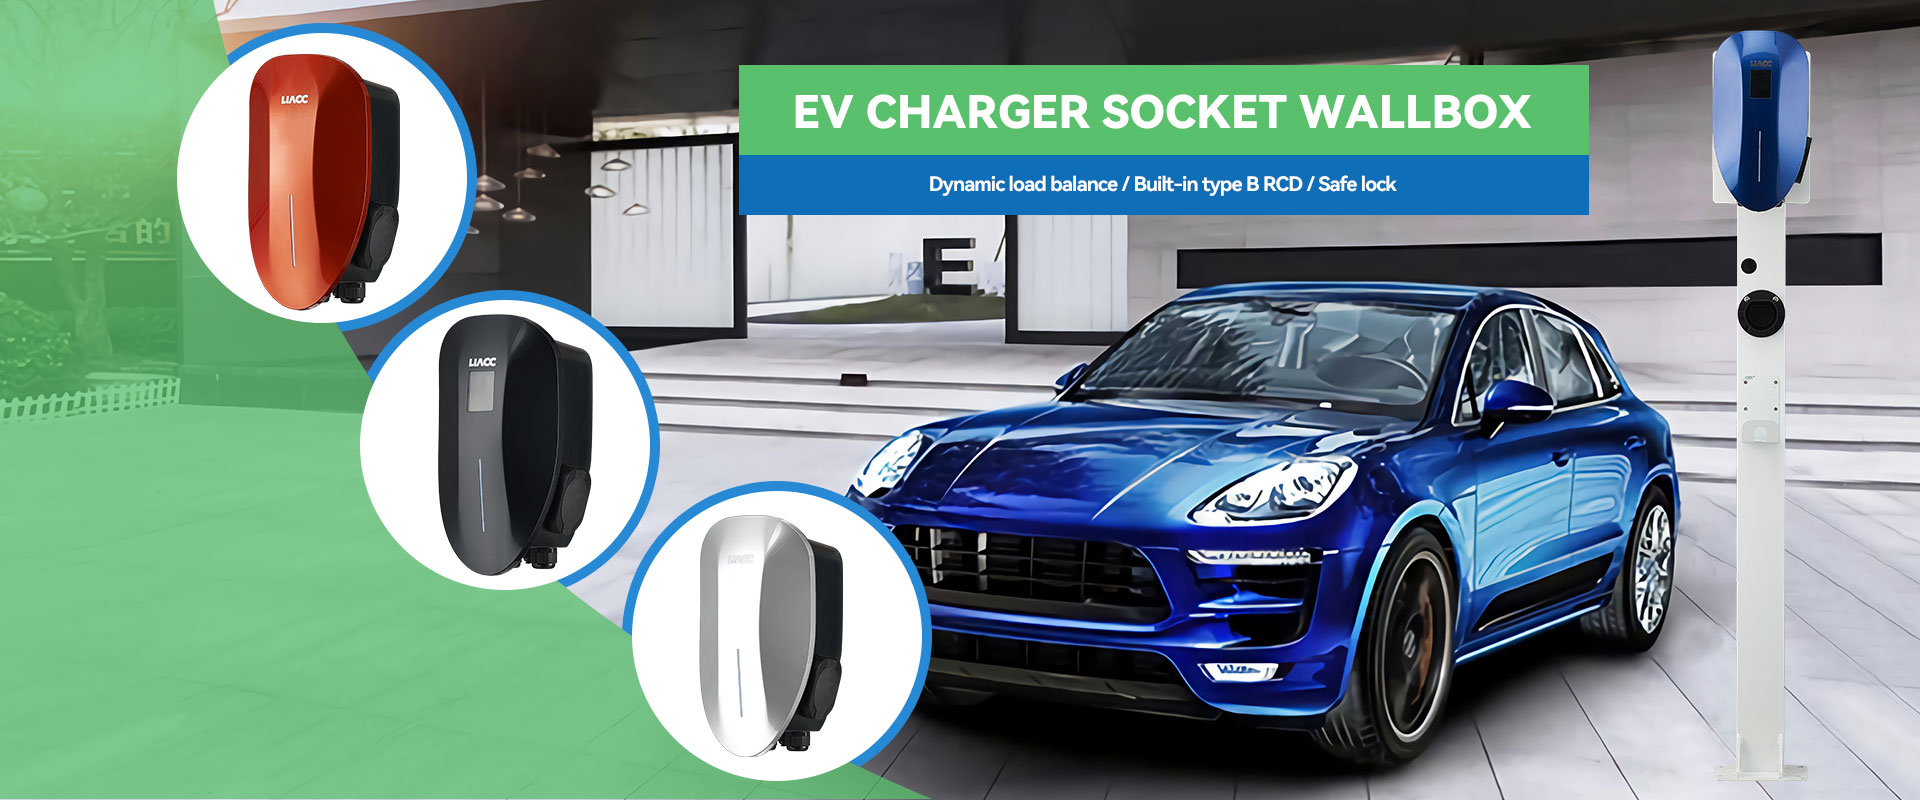 EV Charger Tethered Wallbox Suppliers